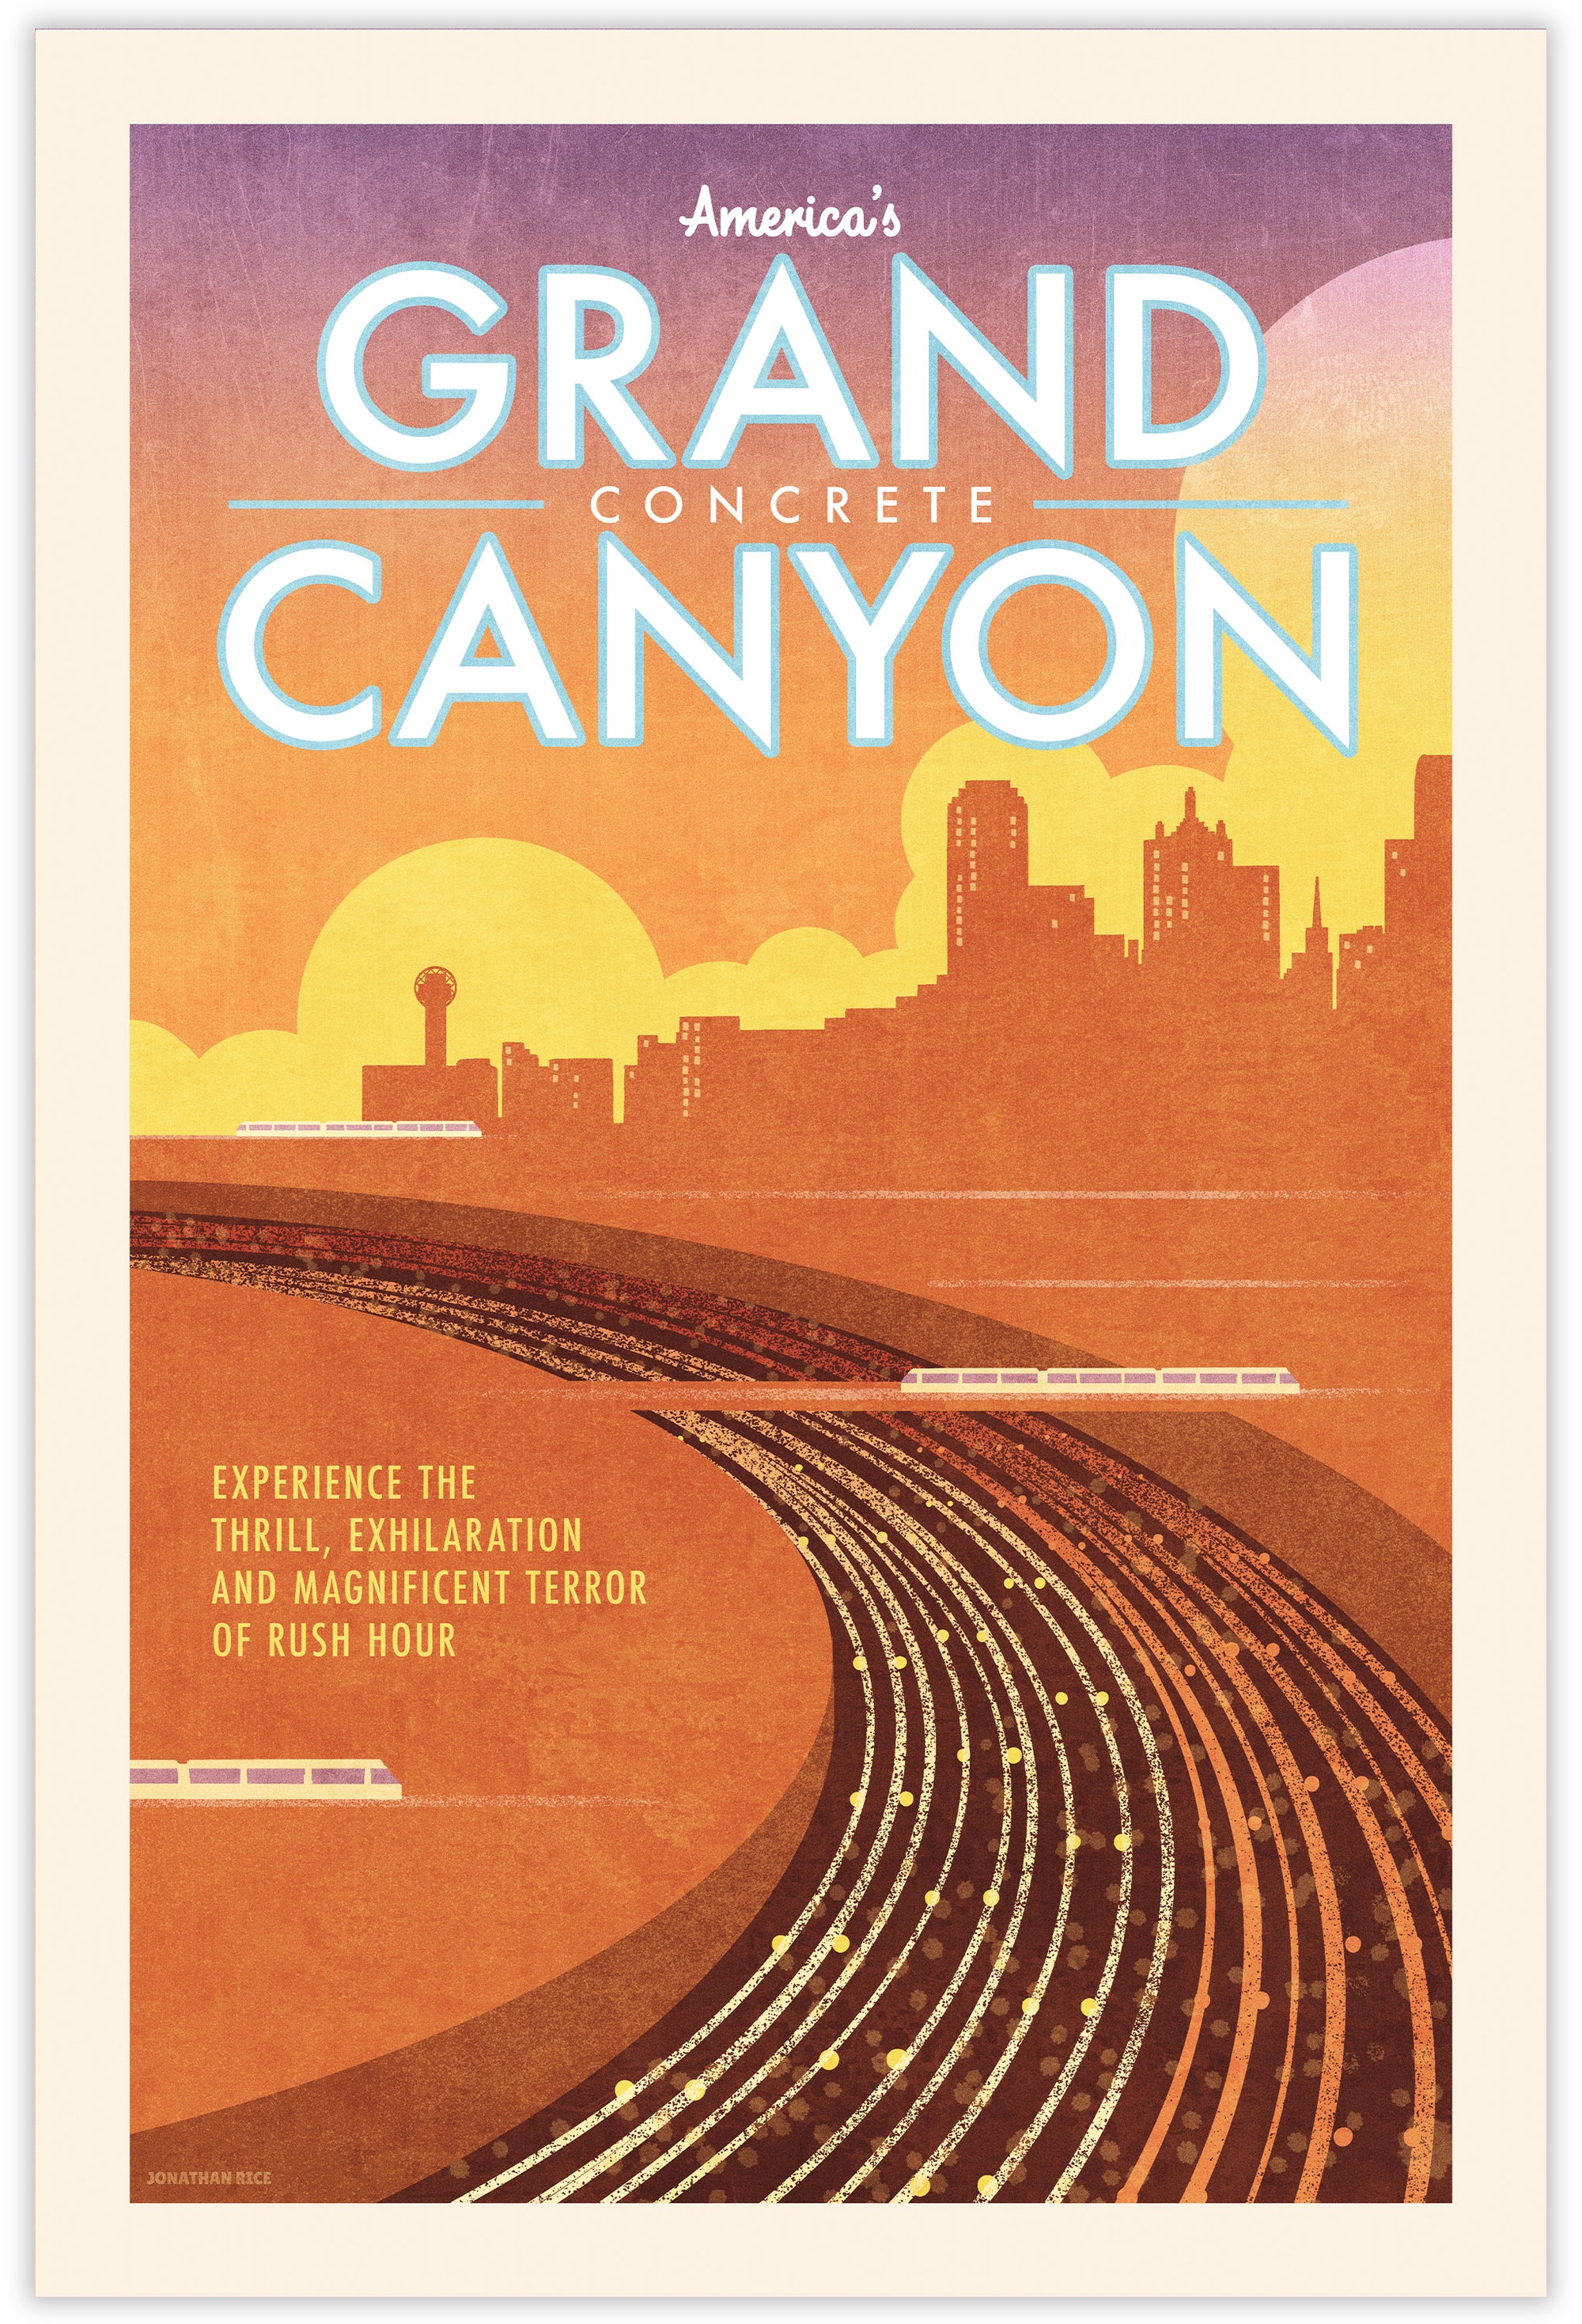 Retro style giclée art print of the Grand Concrete Canyon of America, featuring a modern city skyline, and modern freeway in the foreground. It is brightly colored, yet has gritty texture overall. It has a mid-century modern style and feel.